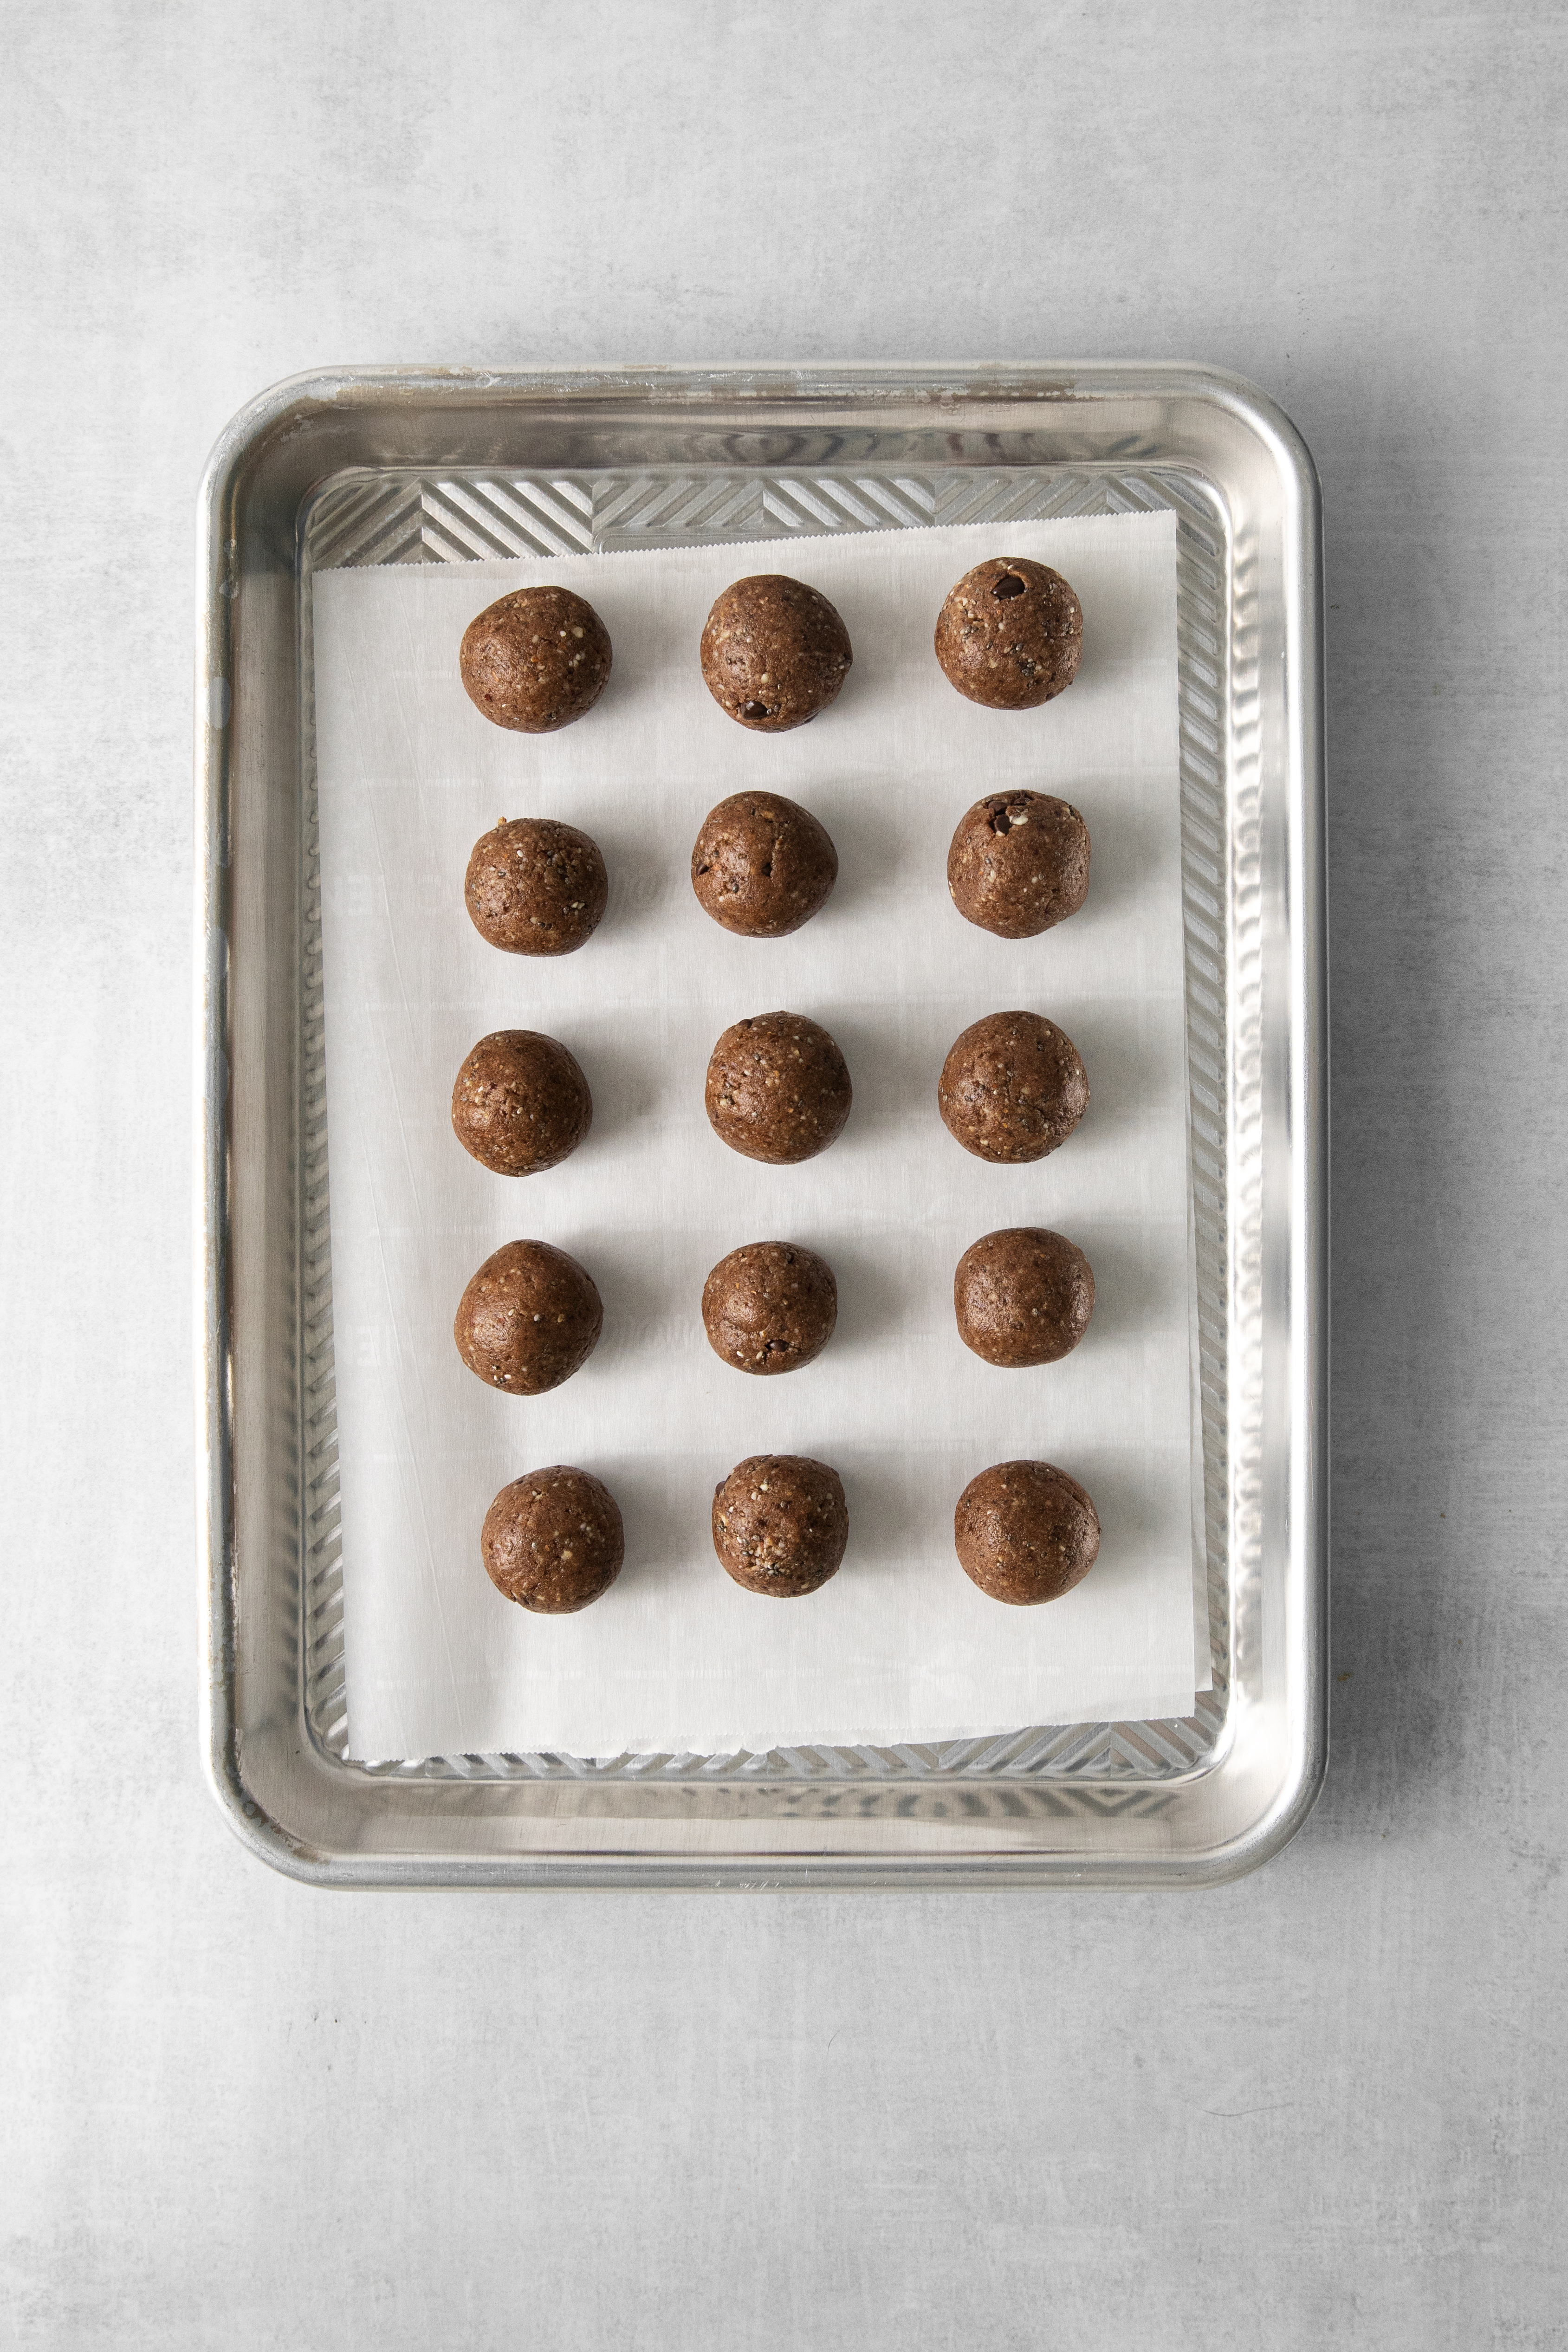 rolled energy bites on a baking sheet.